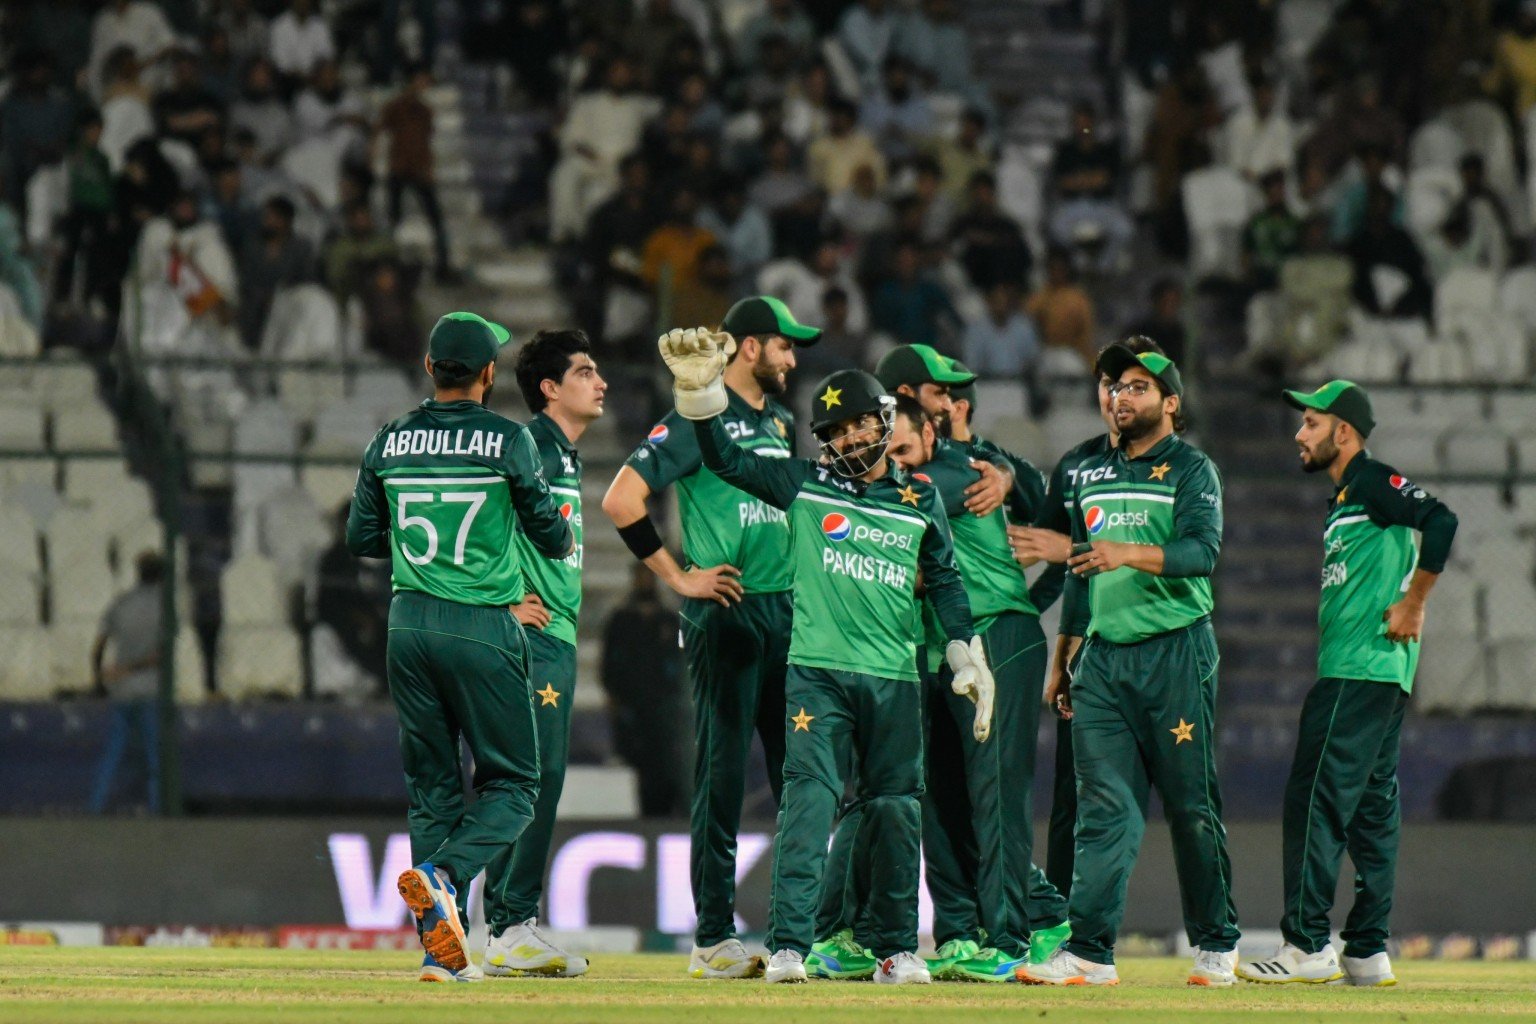 Pakistan stays on track to achieve No.1 ODI ranking for first time